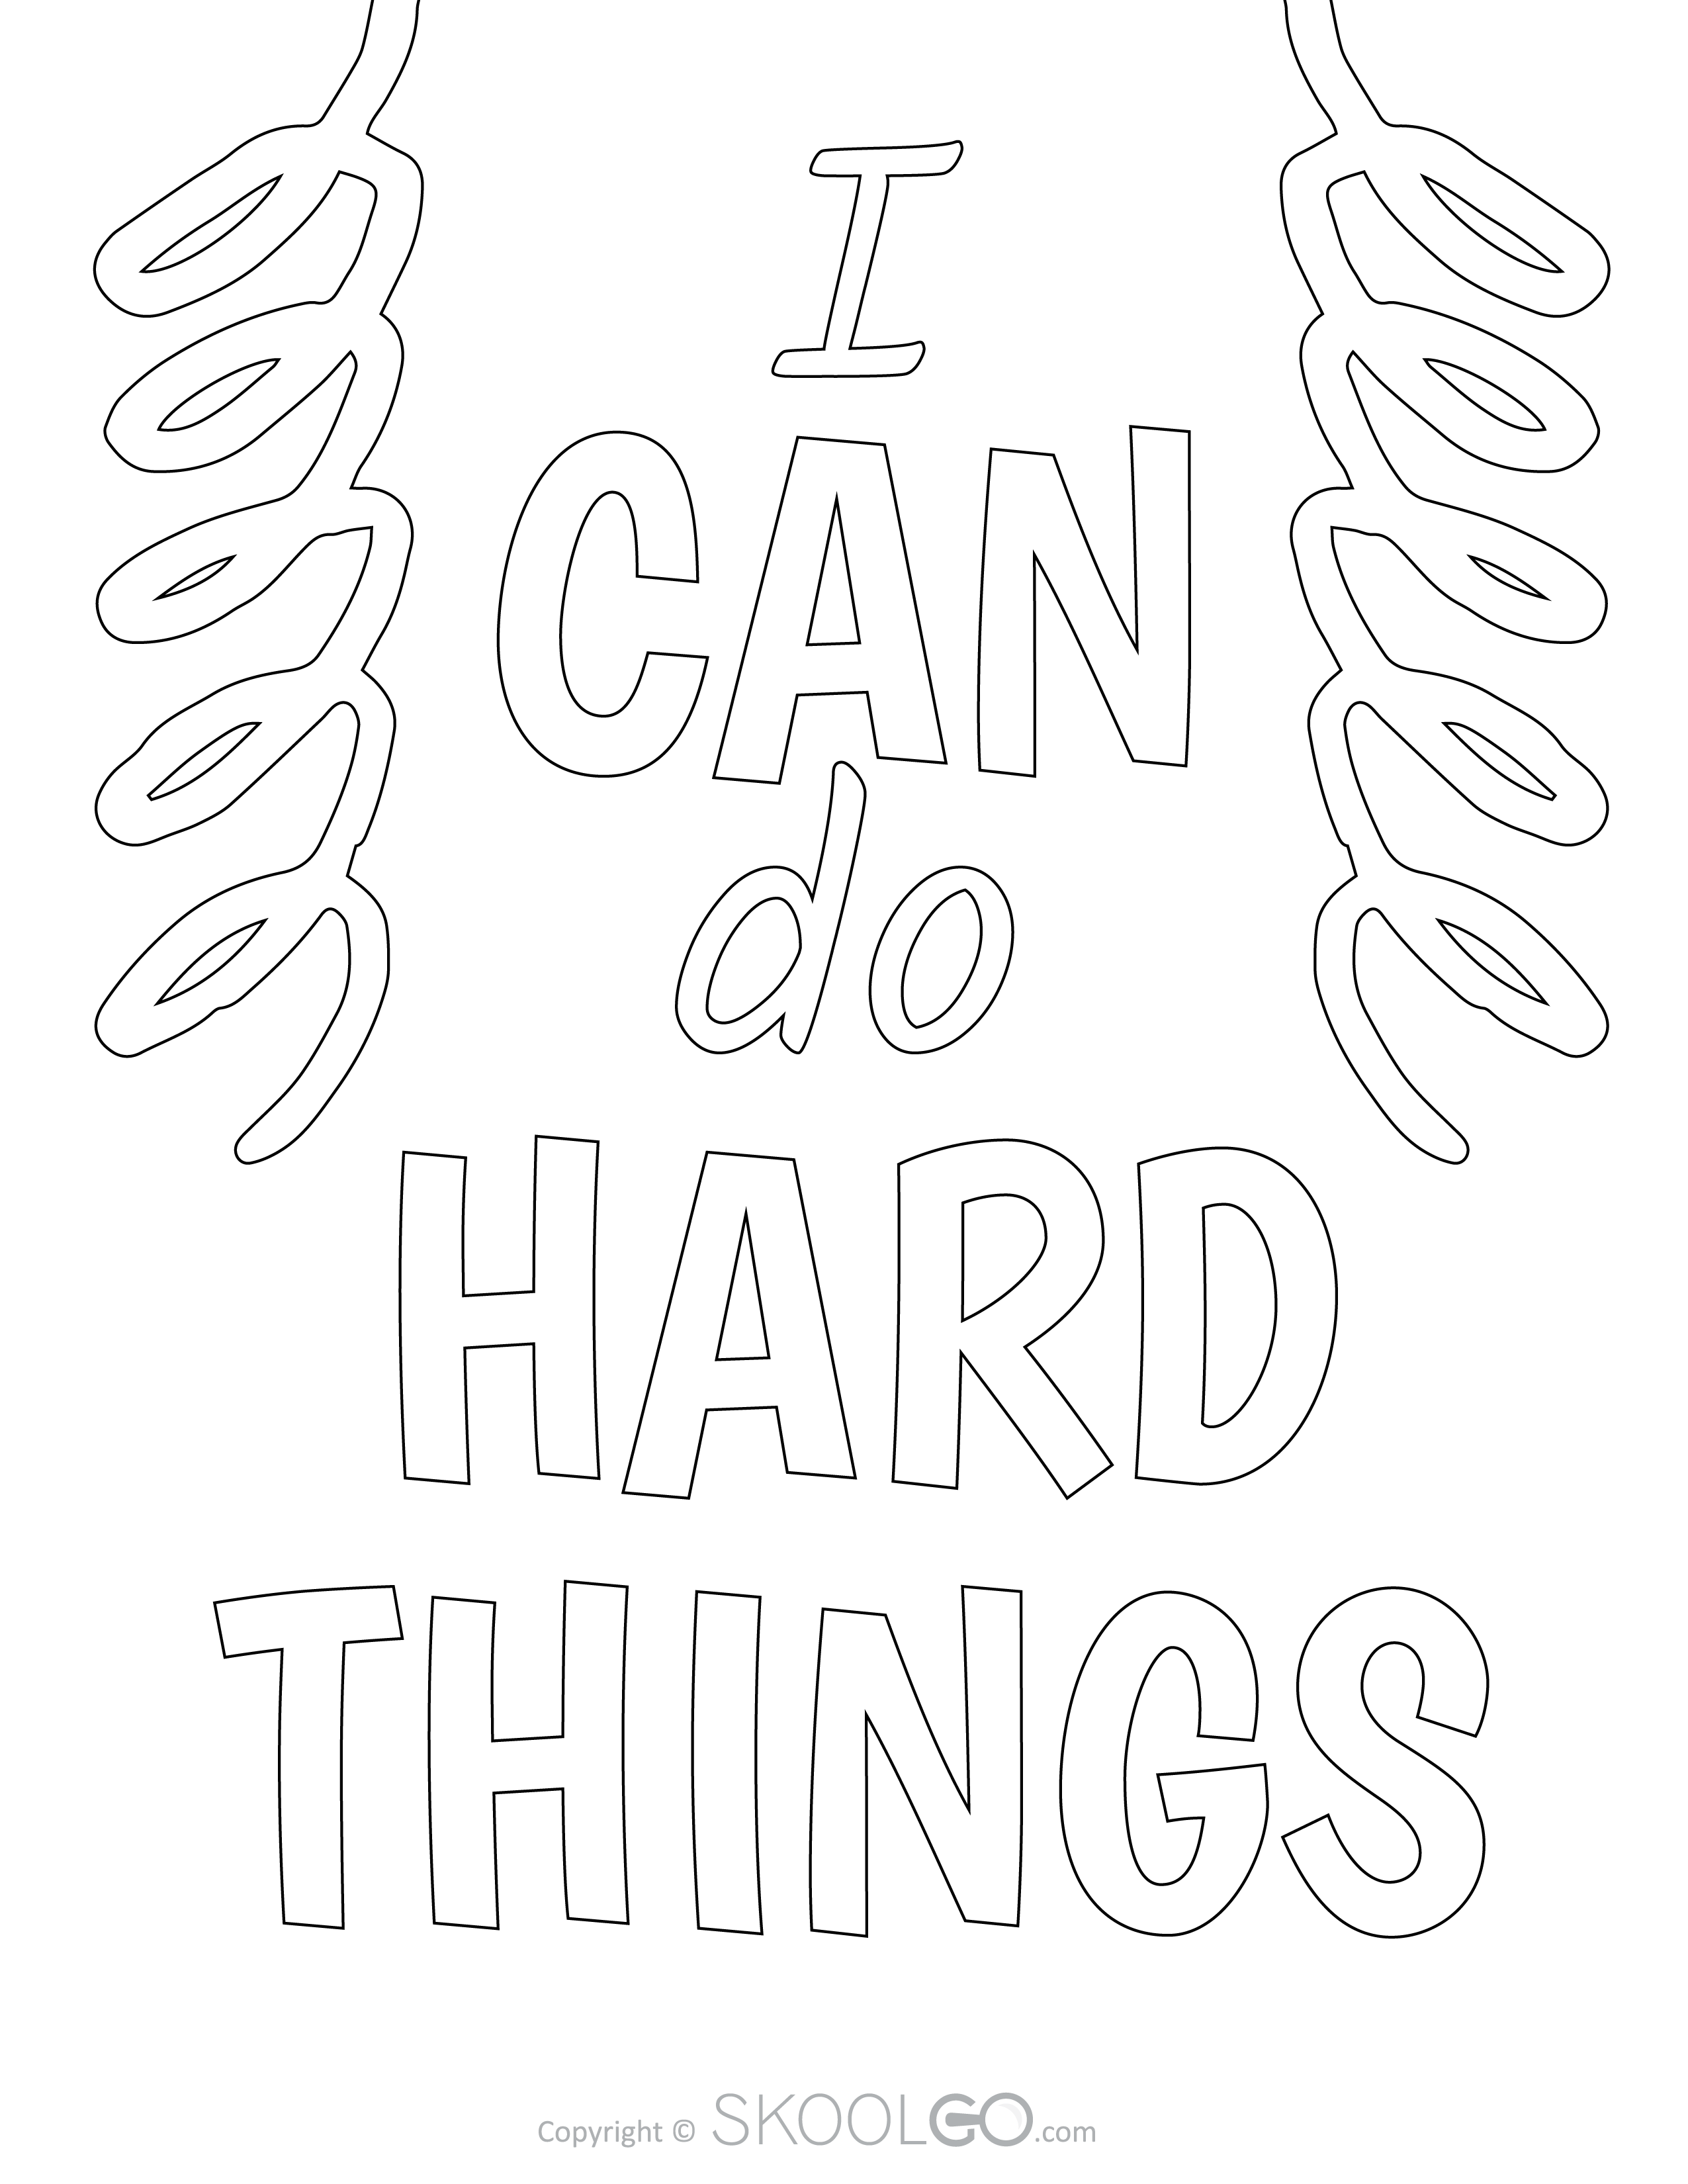 I Can Do Hard Things - Free Classroom Poster Coloring Version